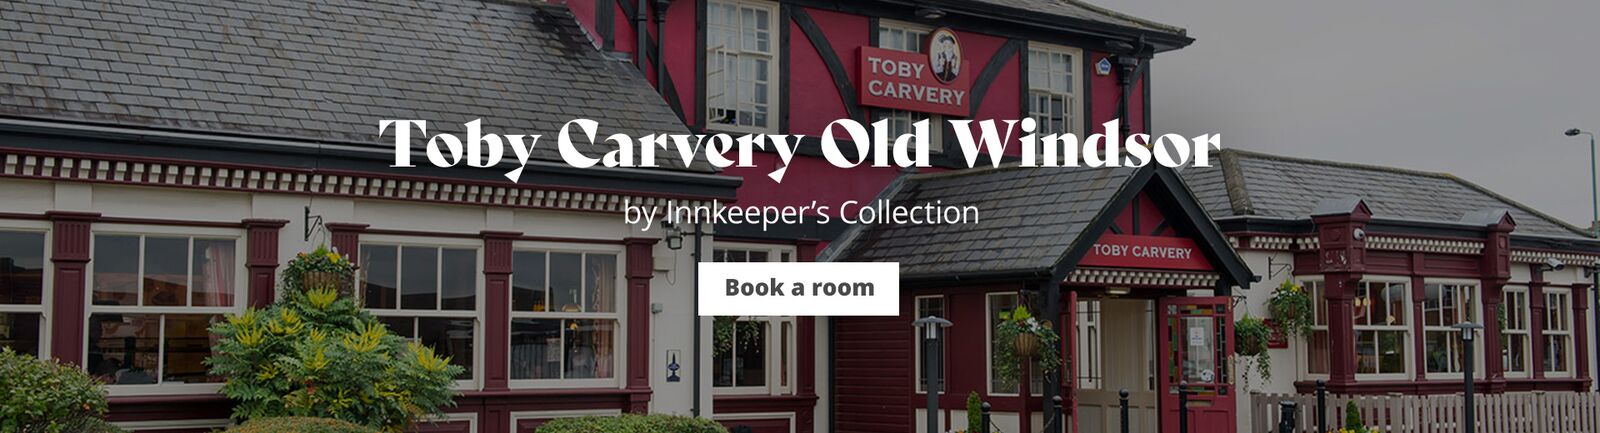 Toby Carvery Old Windsor